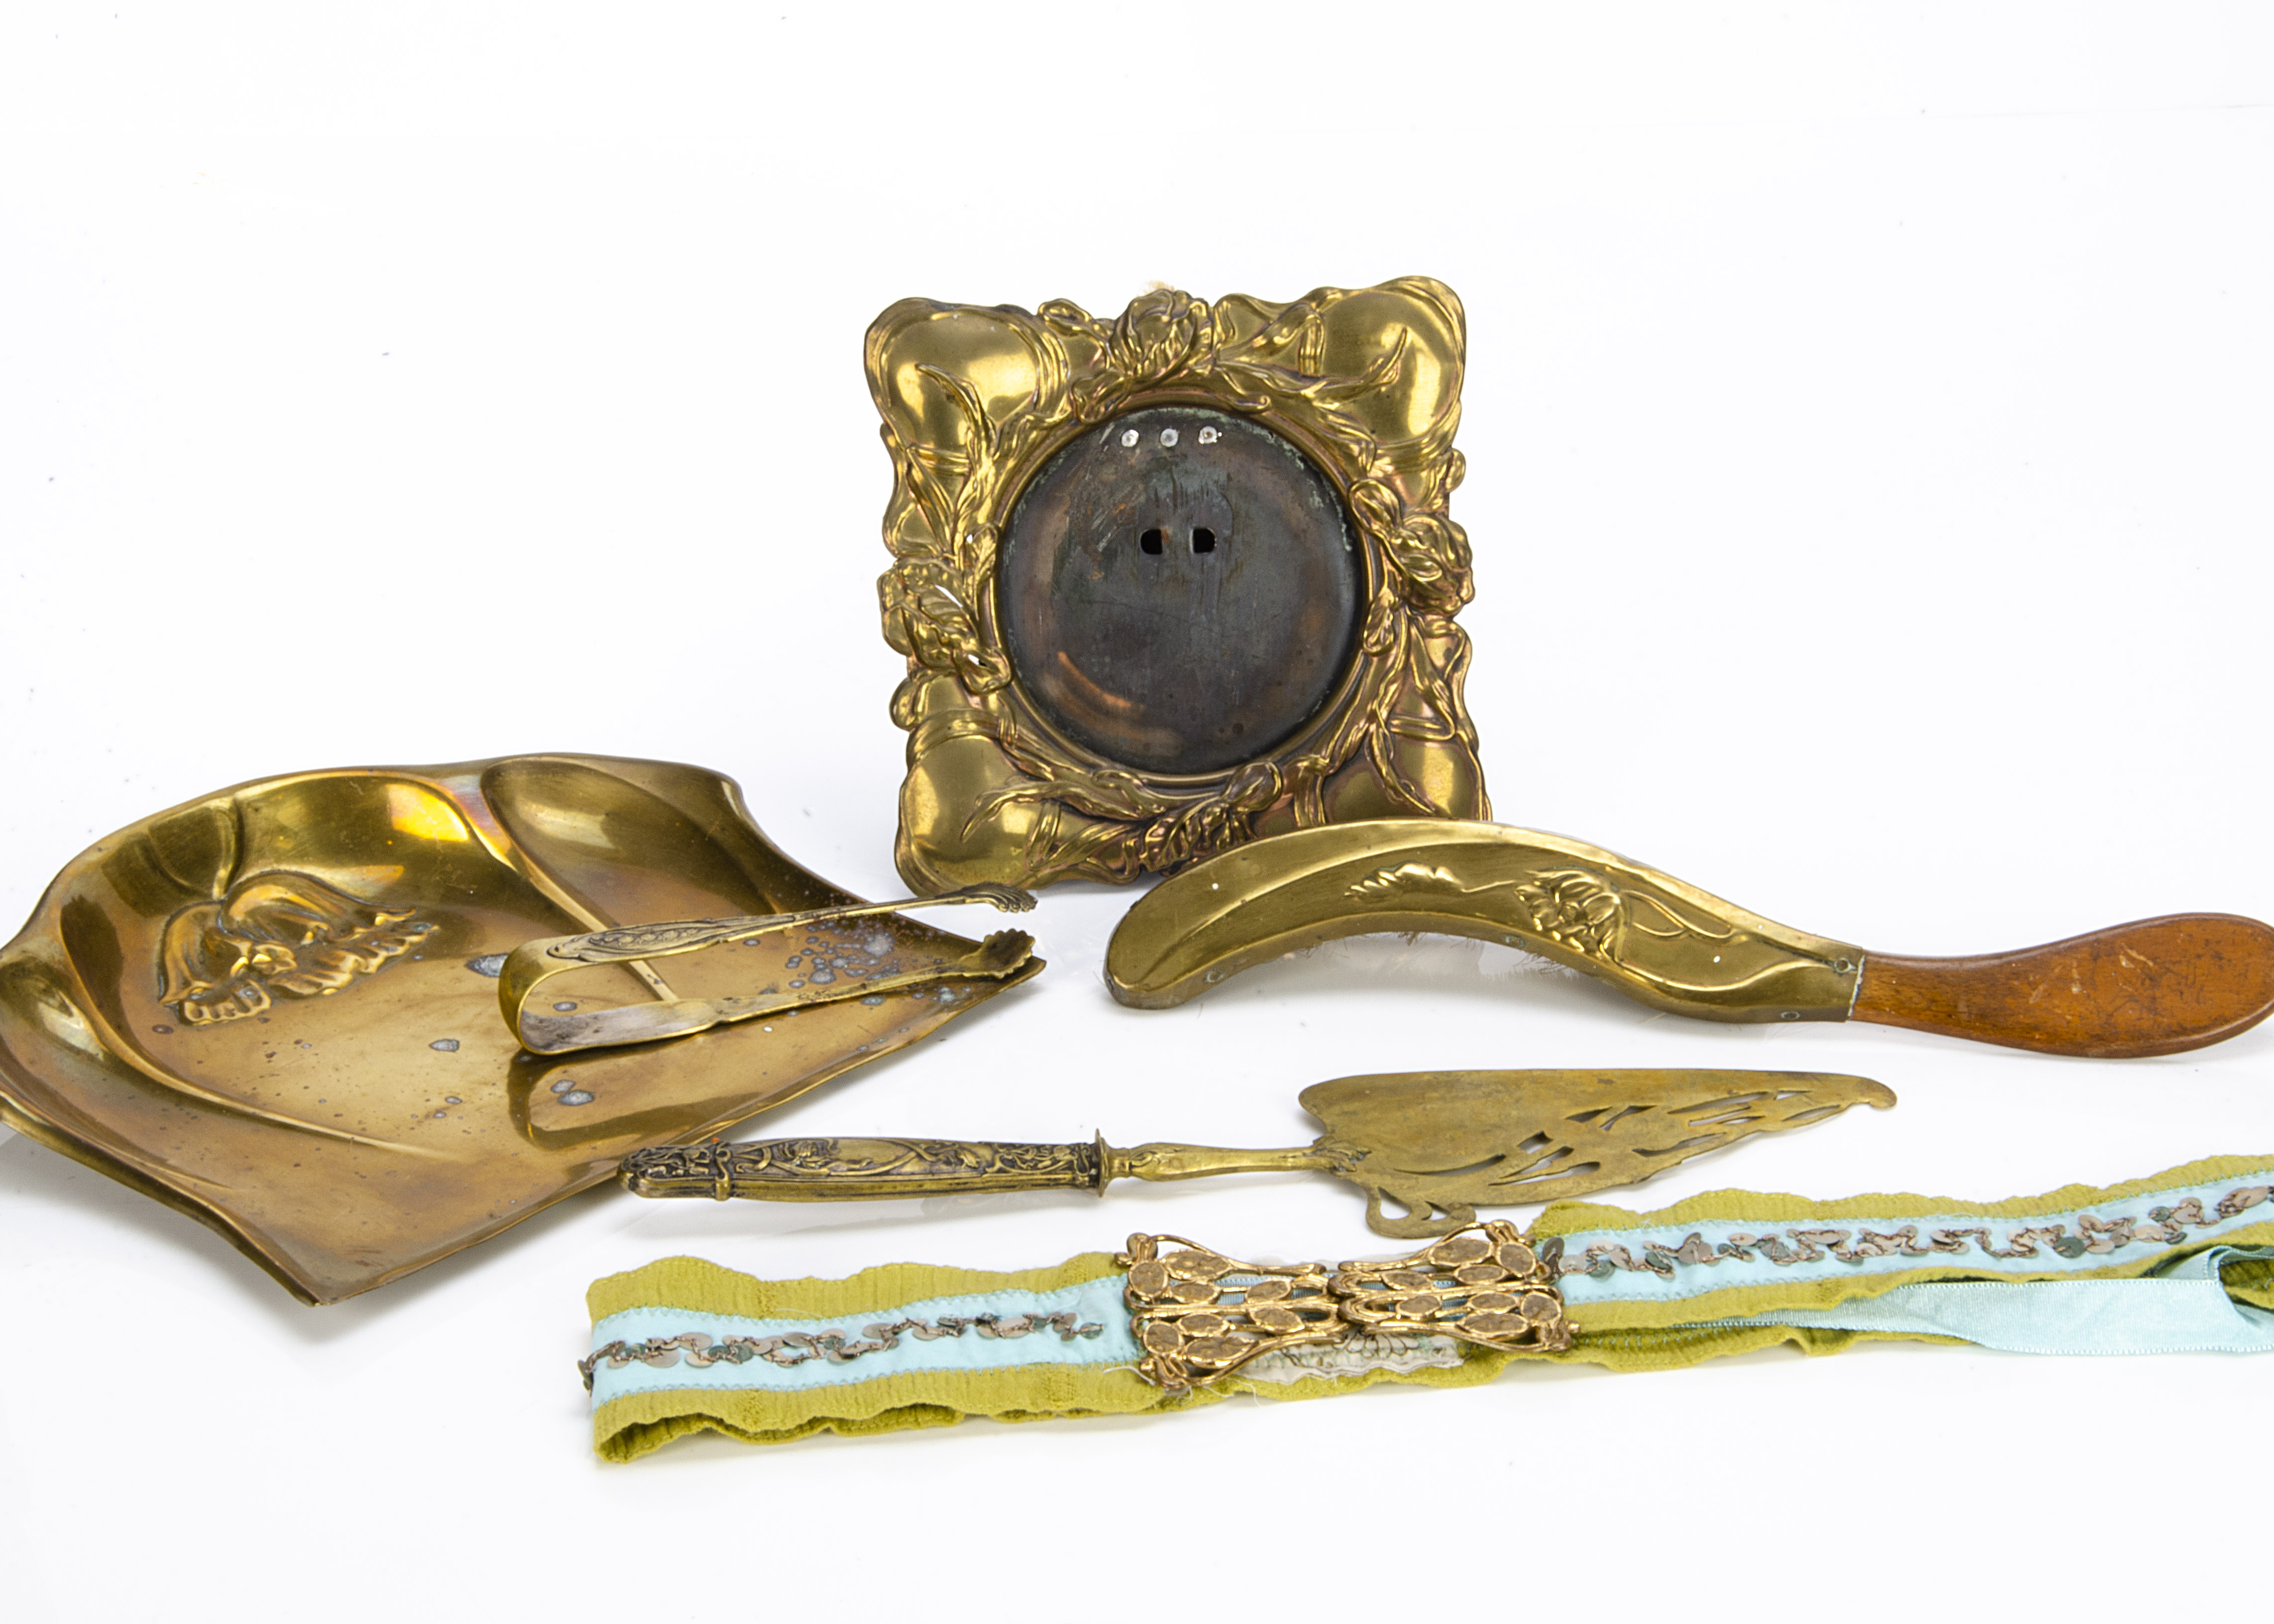 A collection of pressed brass Art Nouveau ware, including a crumb tray and brush, pressed photograph - Image 2 of 2